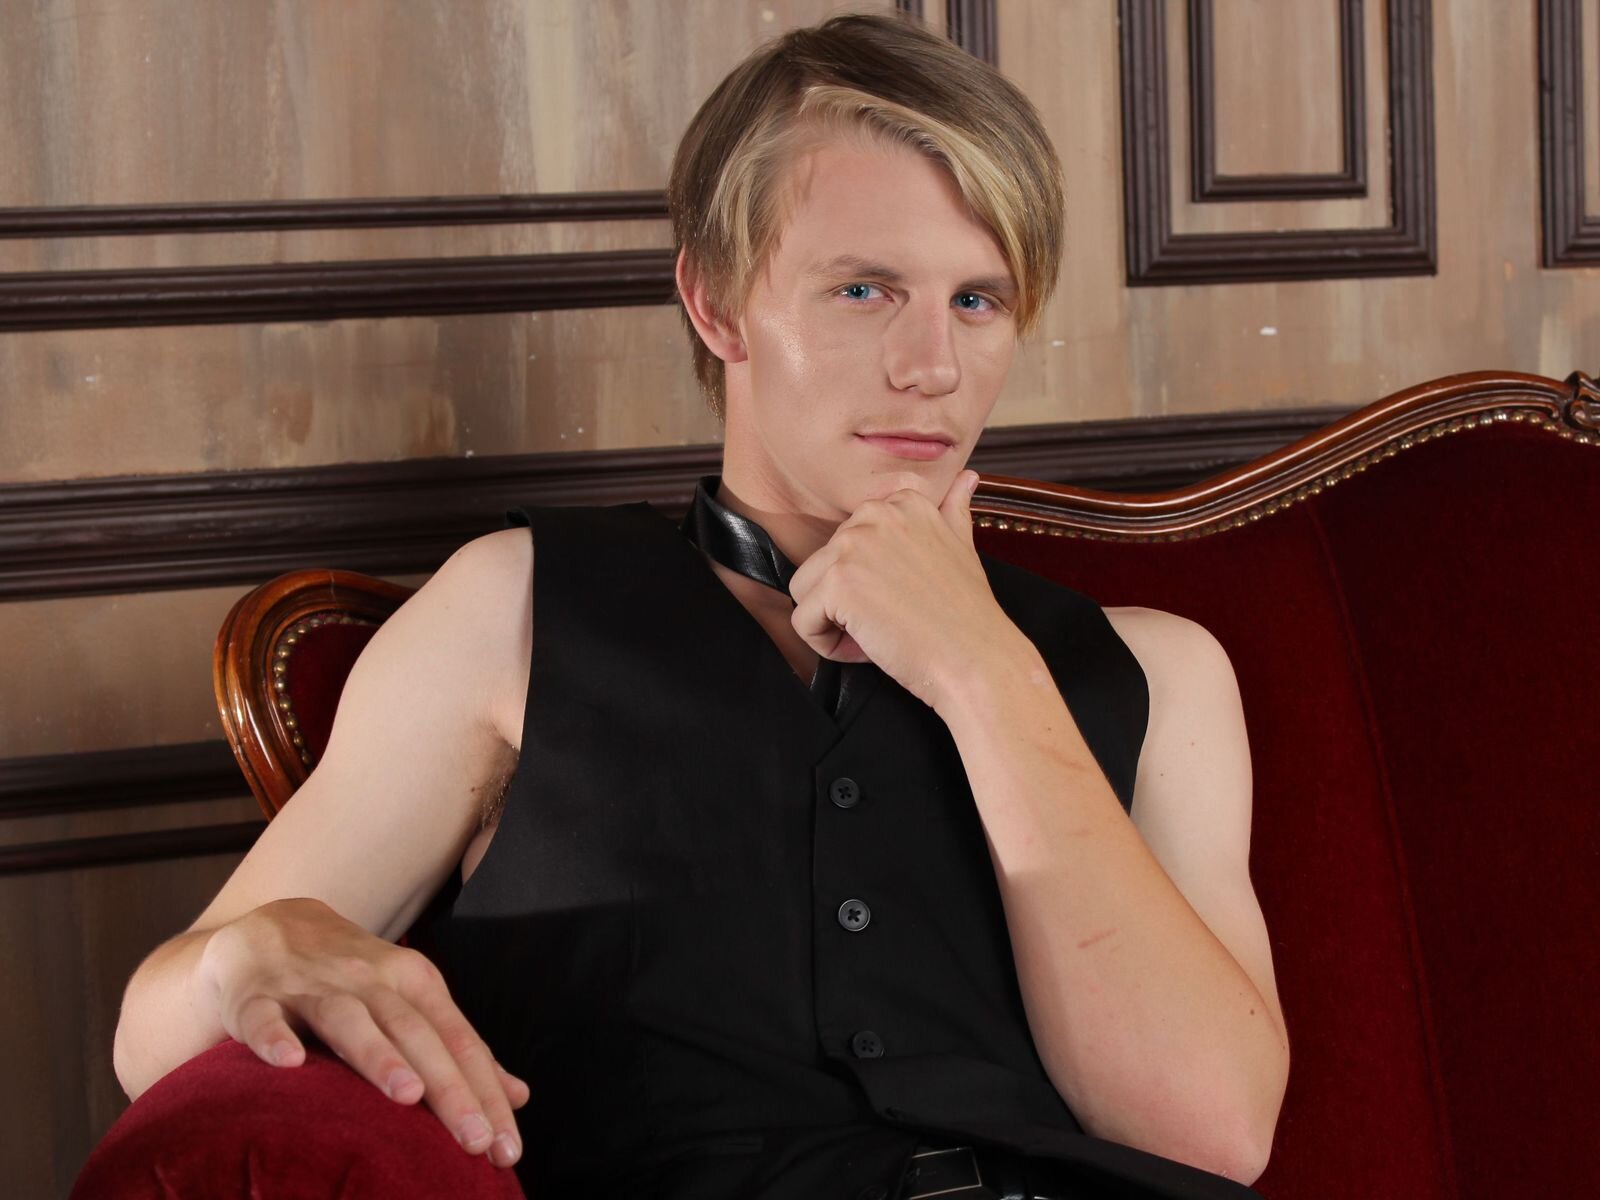 Free Live Sex Chat With RalfBlond